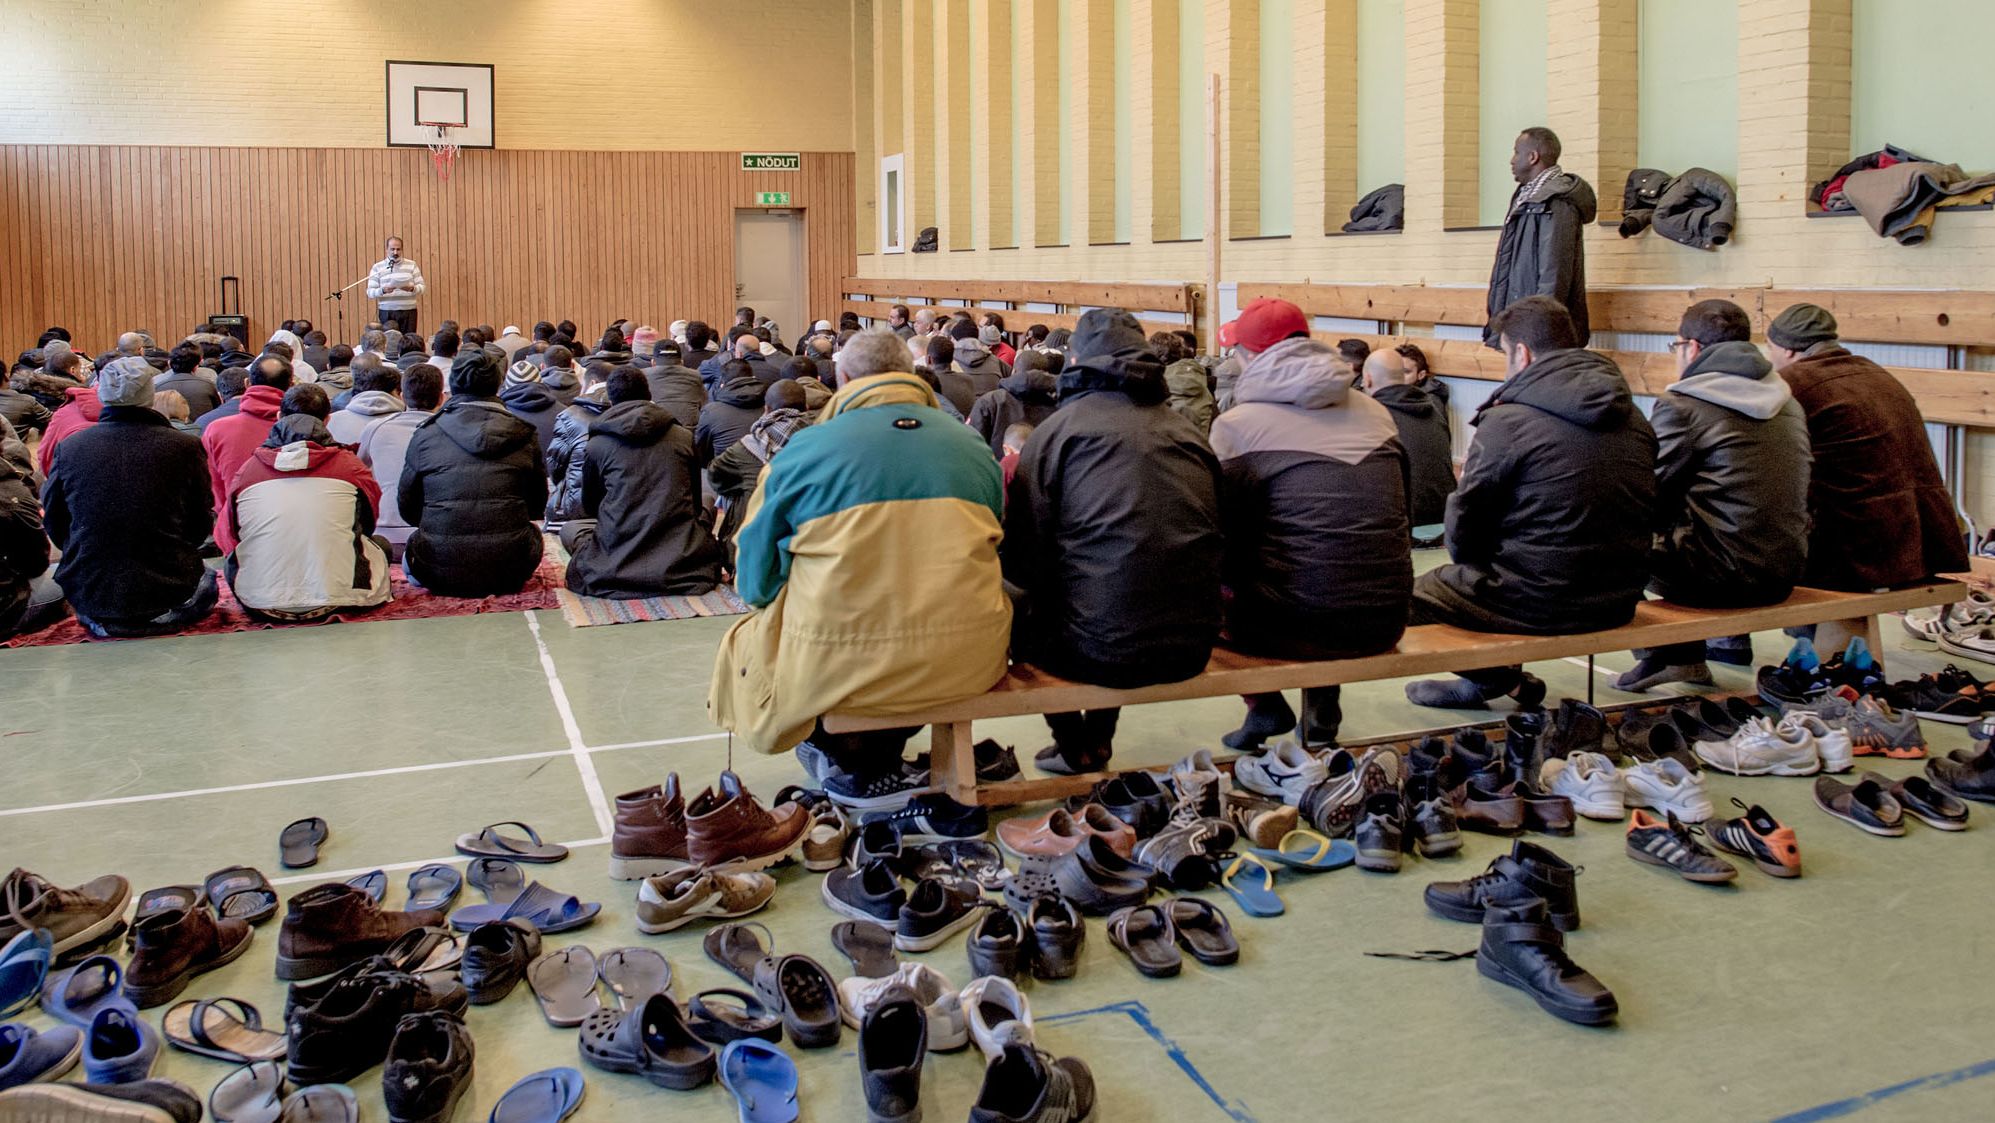 Refugees pray in the gym of the former psychiatric hospital Restad Farm in Vanersborg, Sweden, earlier this month.